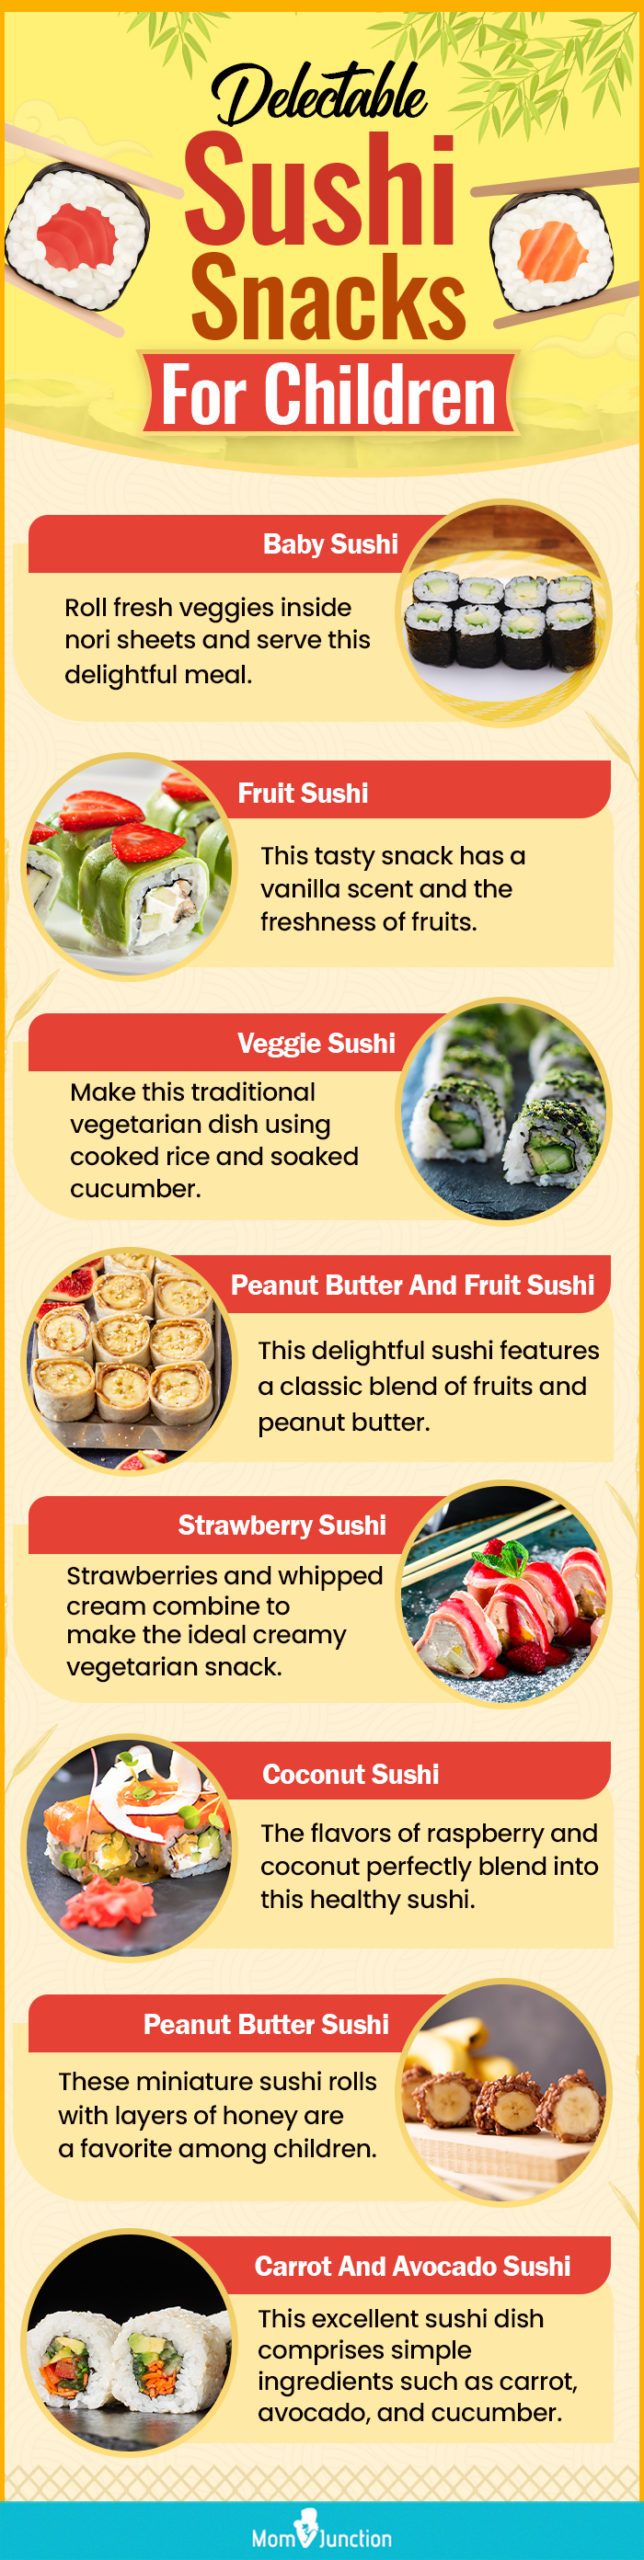 How to make Sushi- 10 easy steps - Healthy Food Guide